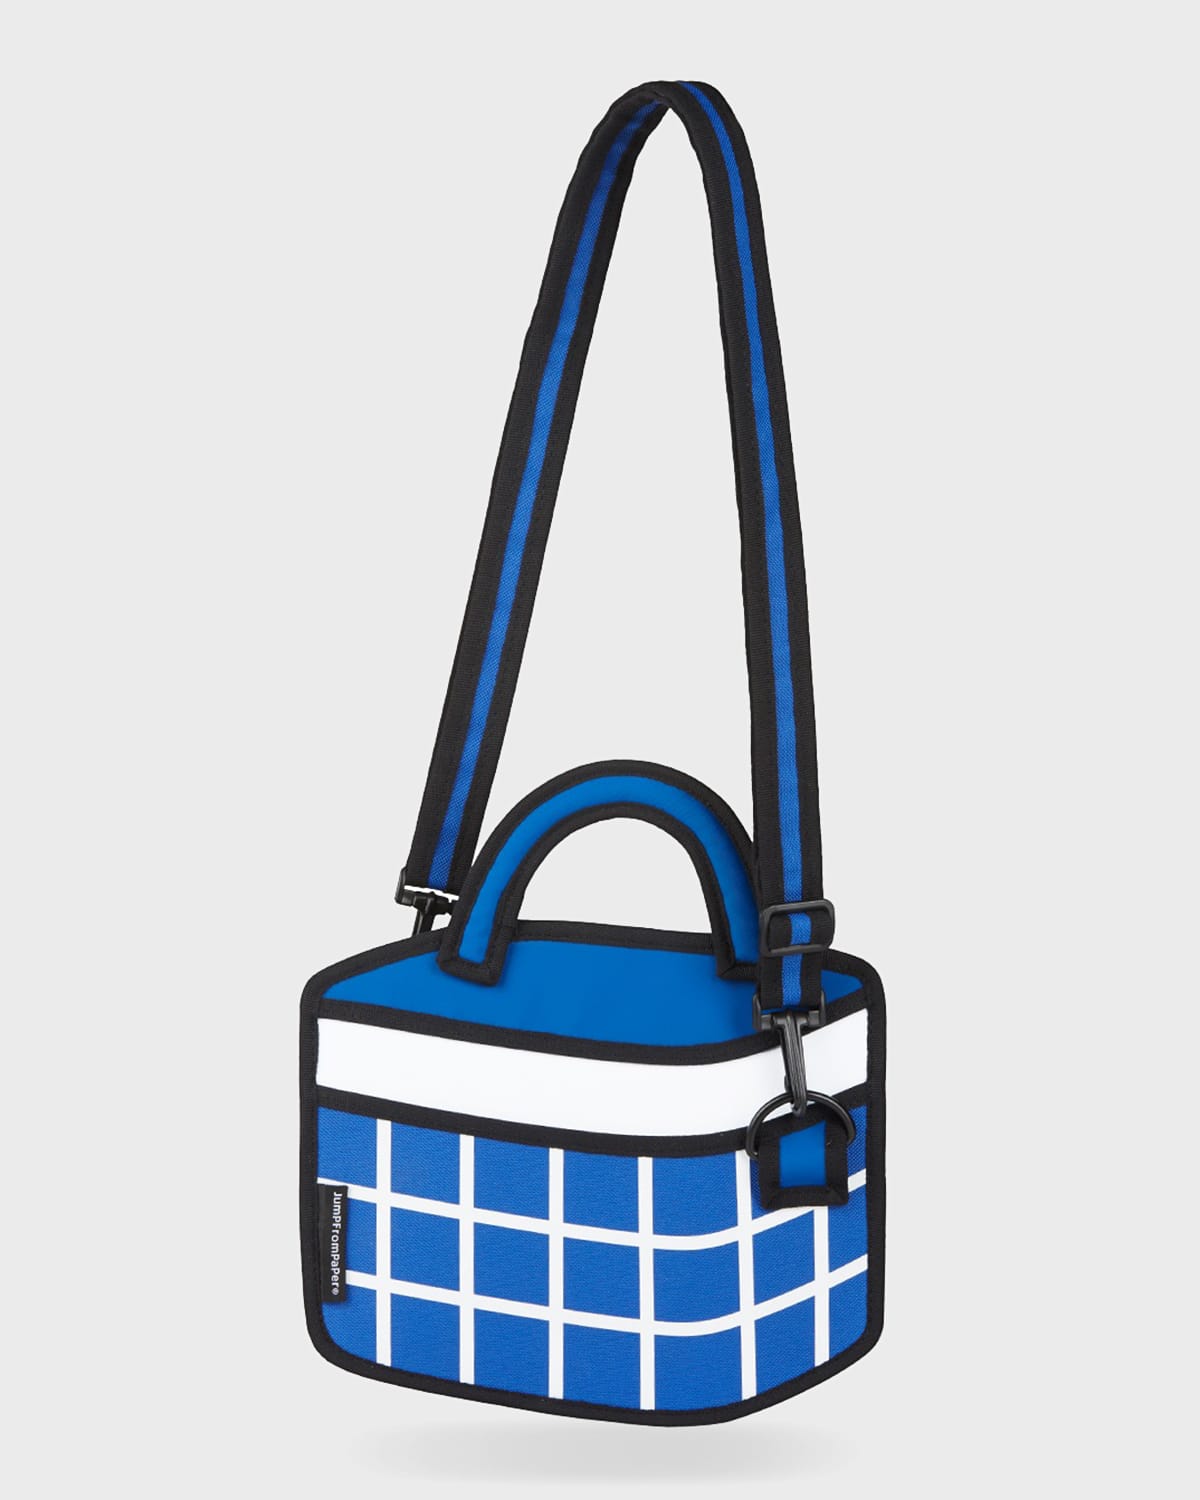 Jump from Paper Kid's Checkered Shoulder Bag